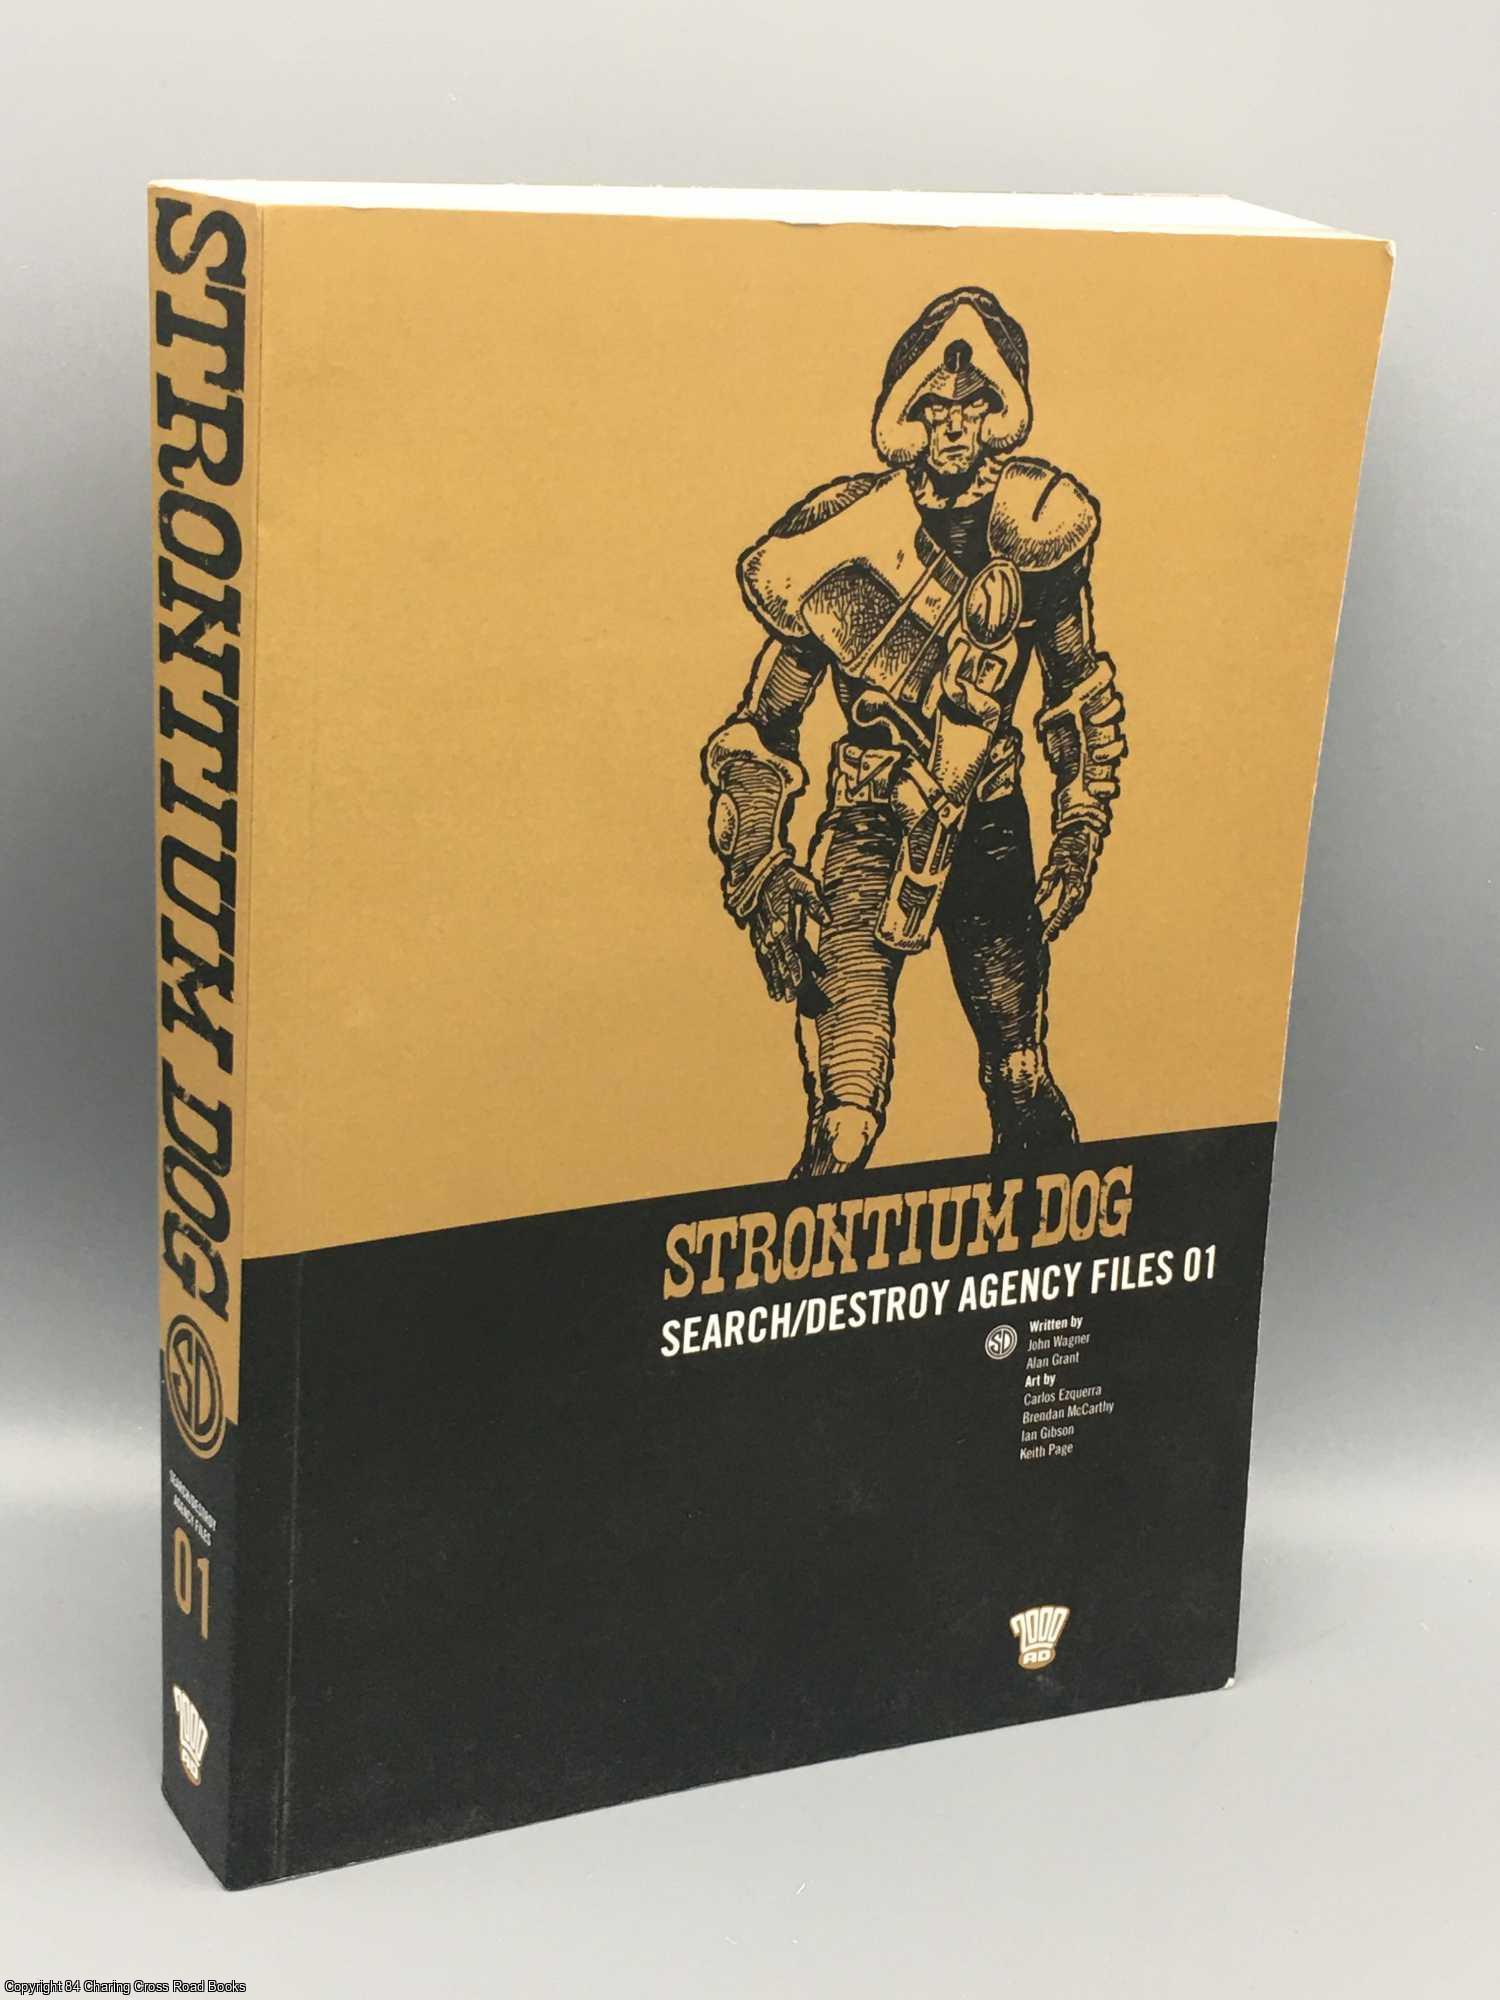 Wagner, John - Strontium Dog: Search/Destroy Agency Files 01